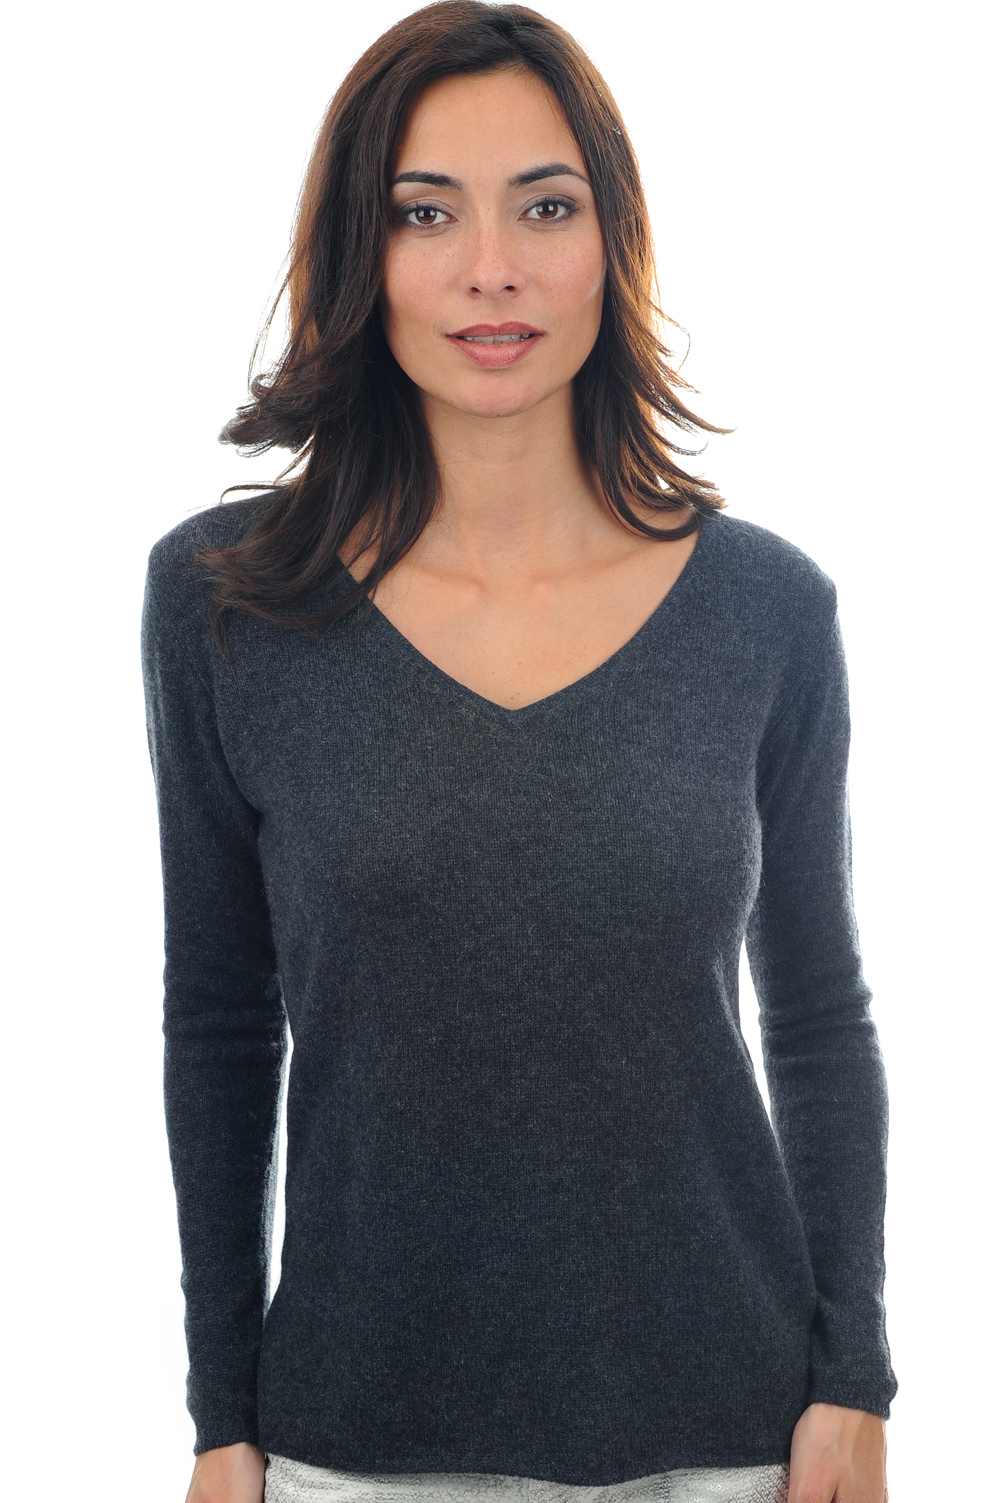 Cashmere ladies basic sweaters at low prices flavie charcoal marl xl